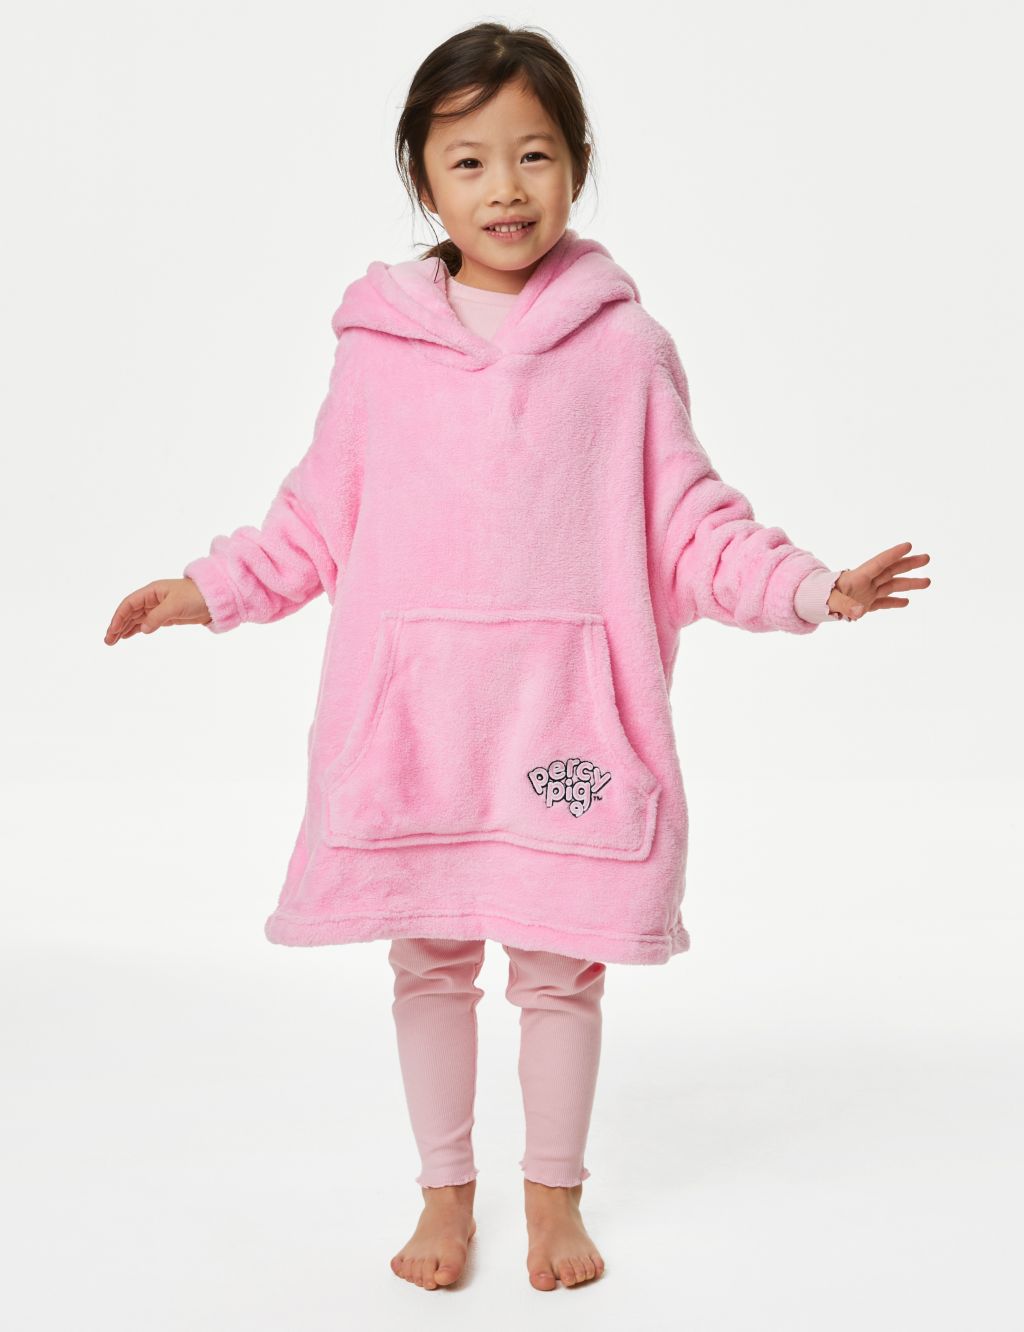 Novelty Percy Pig™ Foldable Hoodie (3-16 Yrs) image 3